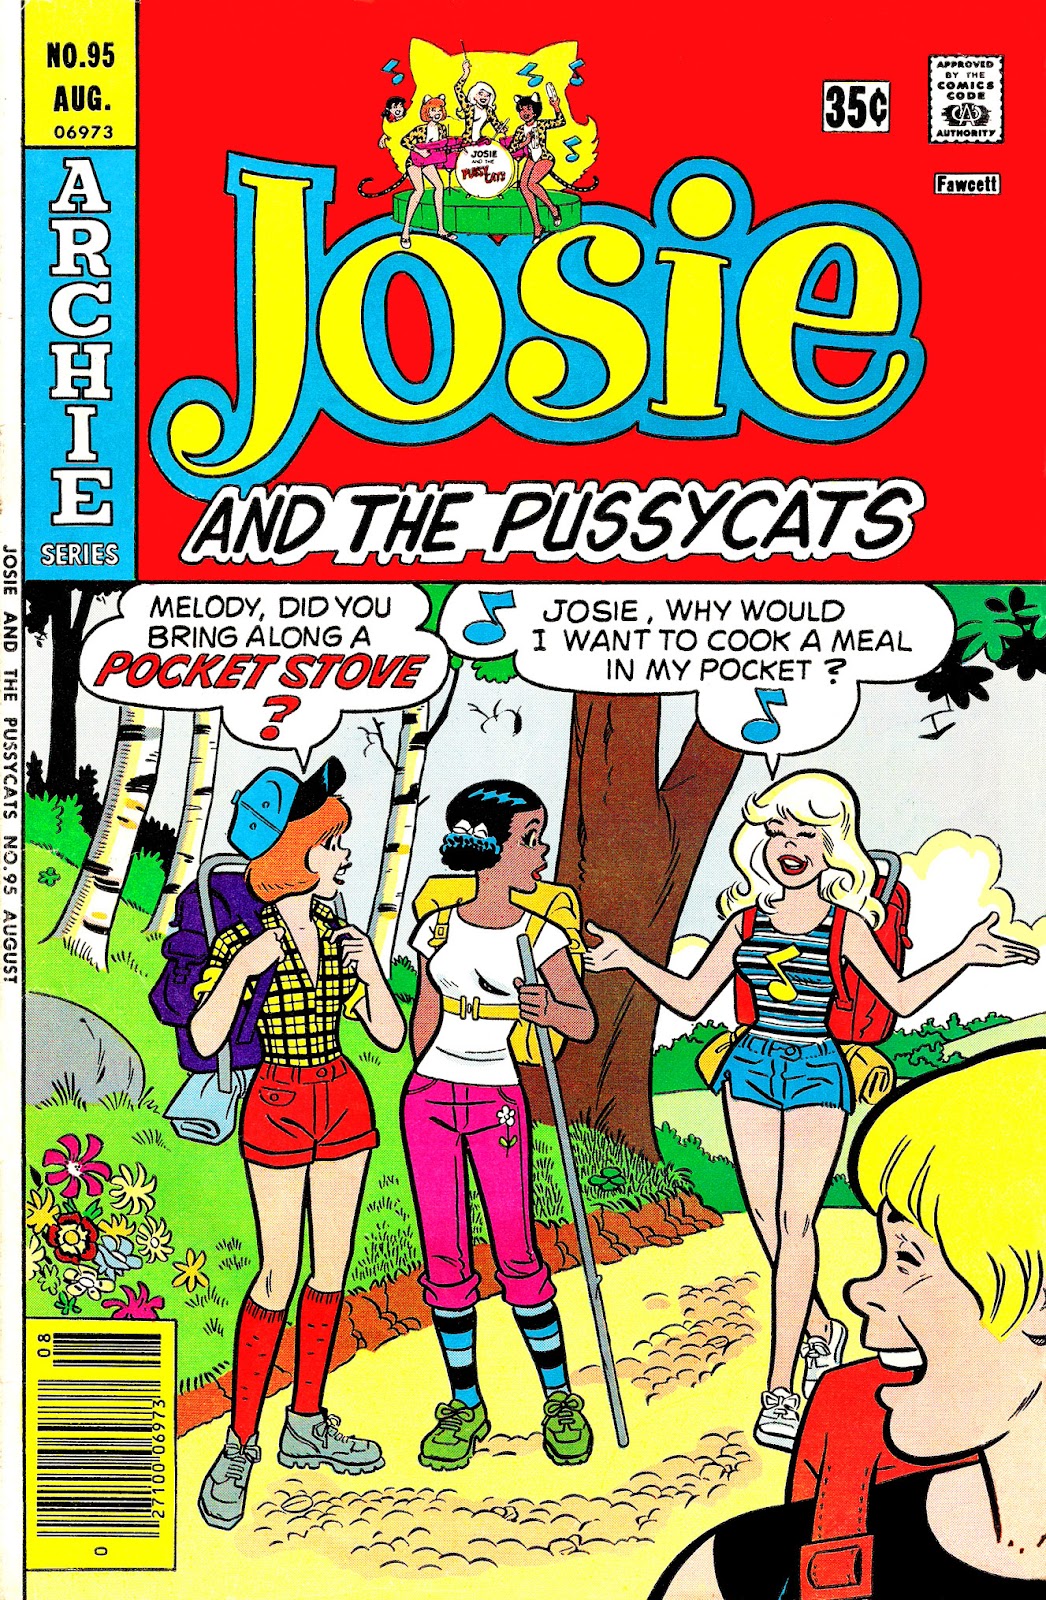 Josie and the Pussycats (1969) issue 95 - Page 1